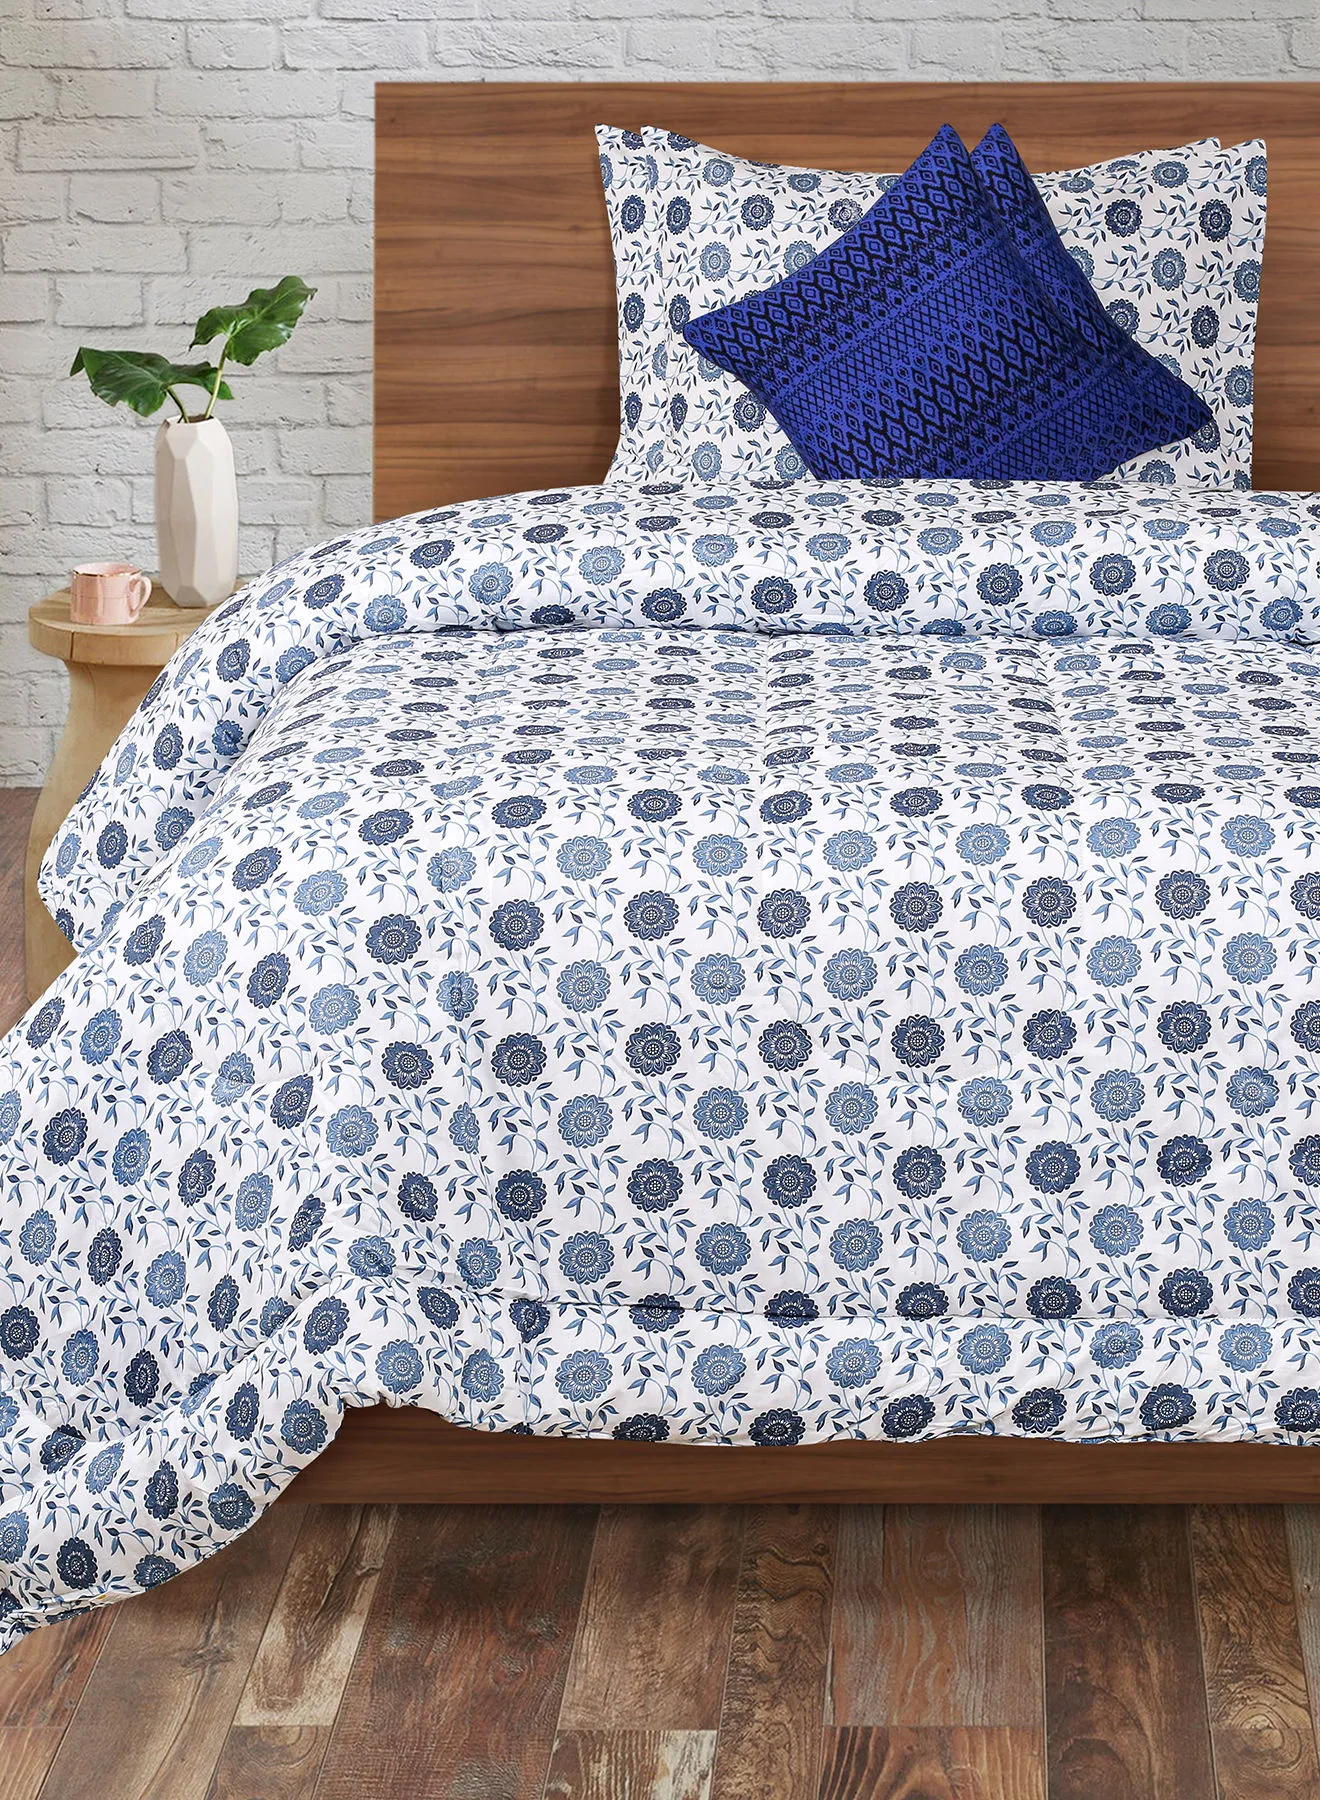 Amal Comforter Set King Size All Season Everyday Use Bedding Set 100% Cotton 5 Pieces 1 Comforter 2 Pillow Covers 2 Cushion Covers White/Blue